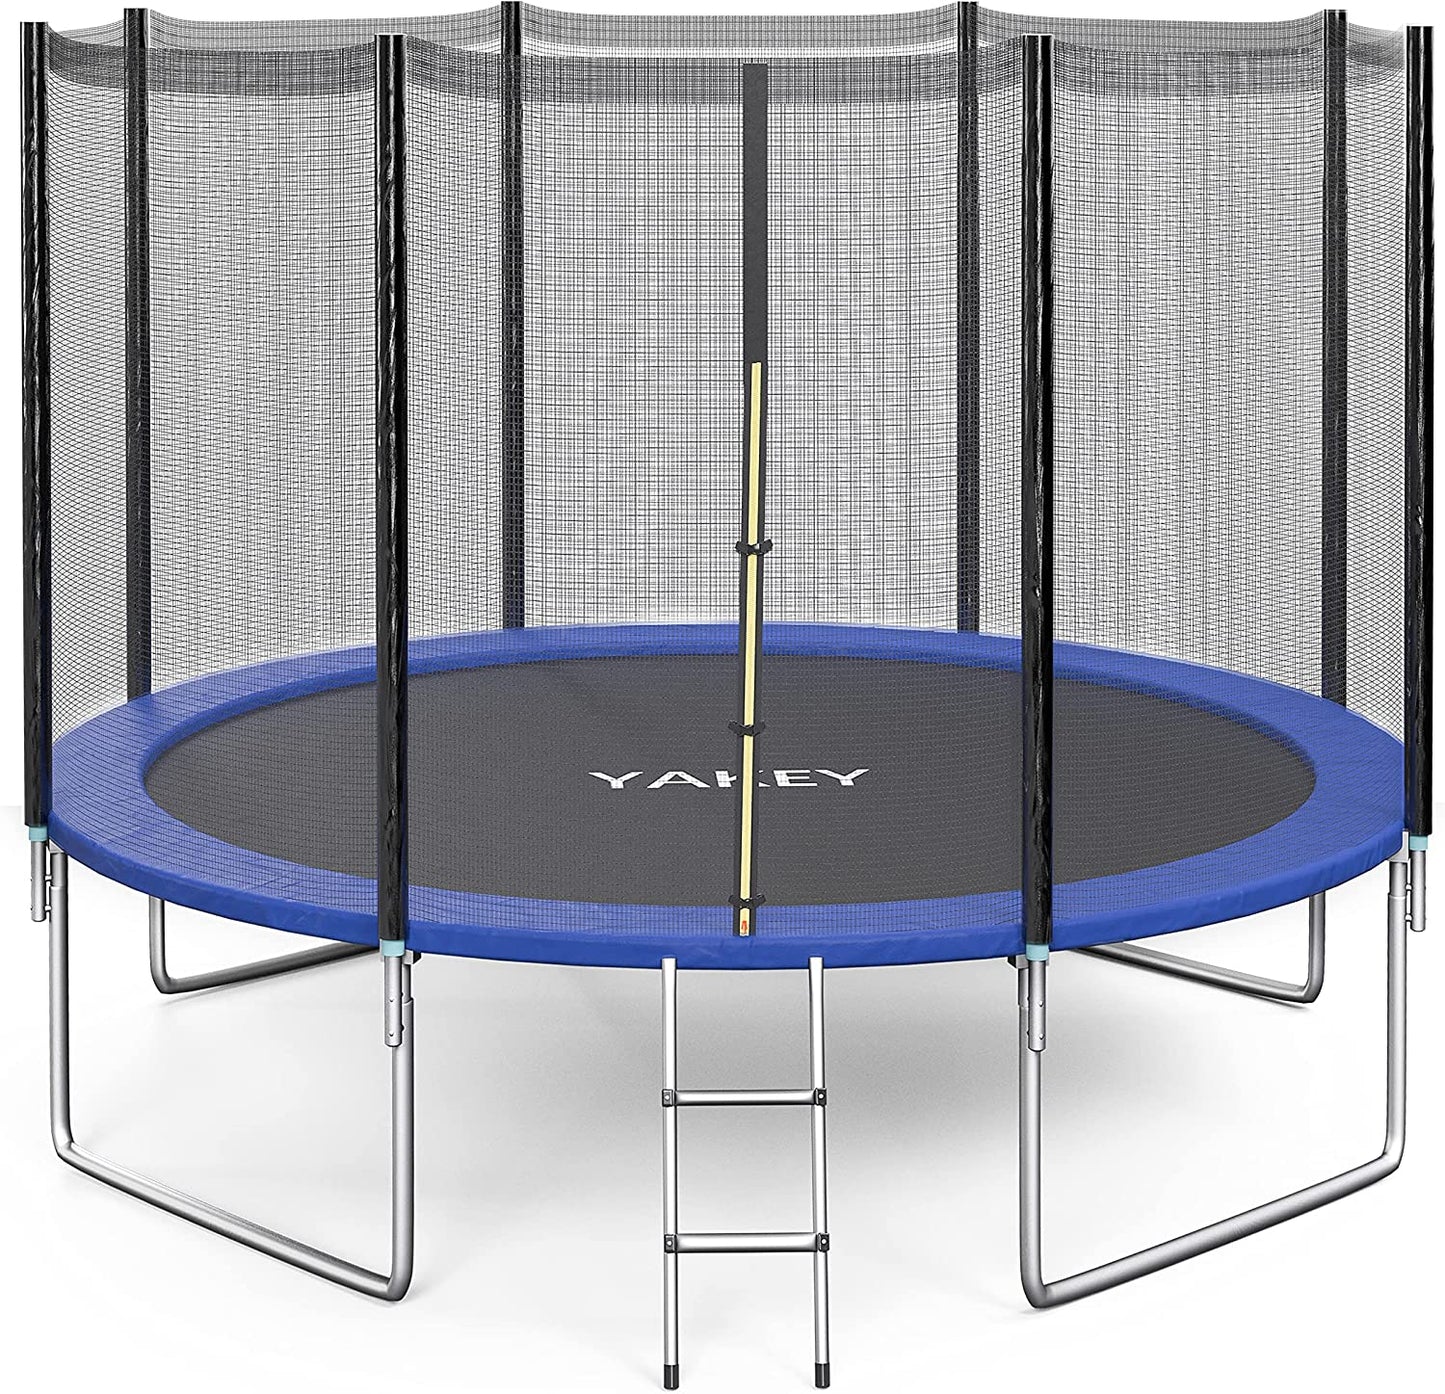 YAKEY 12FT Trampoline with Safety Enclosure Net